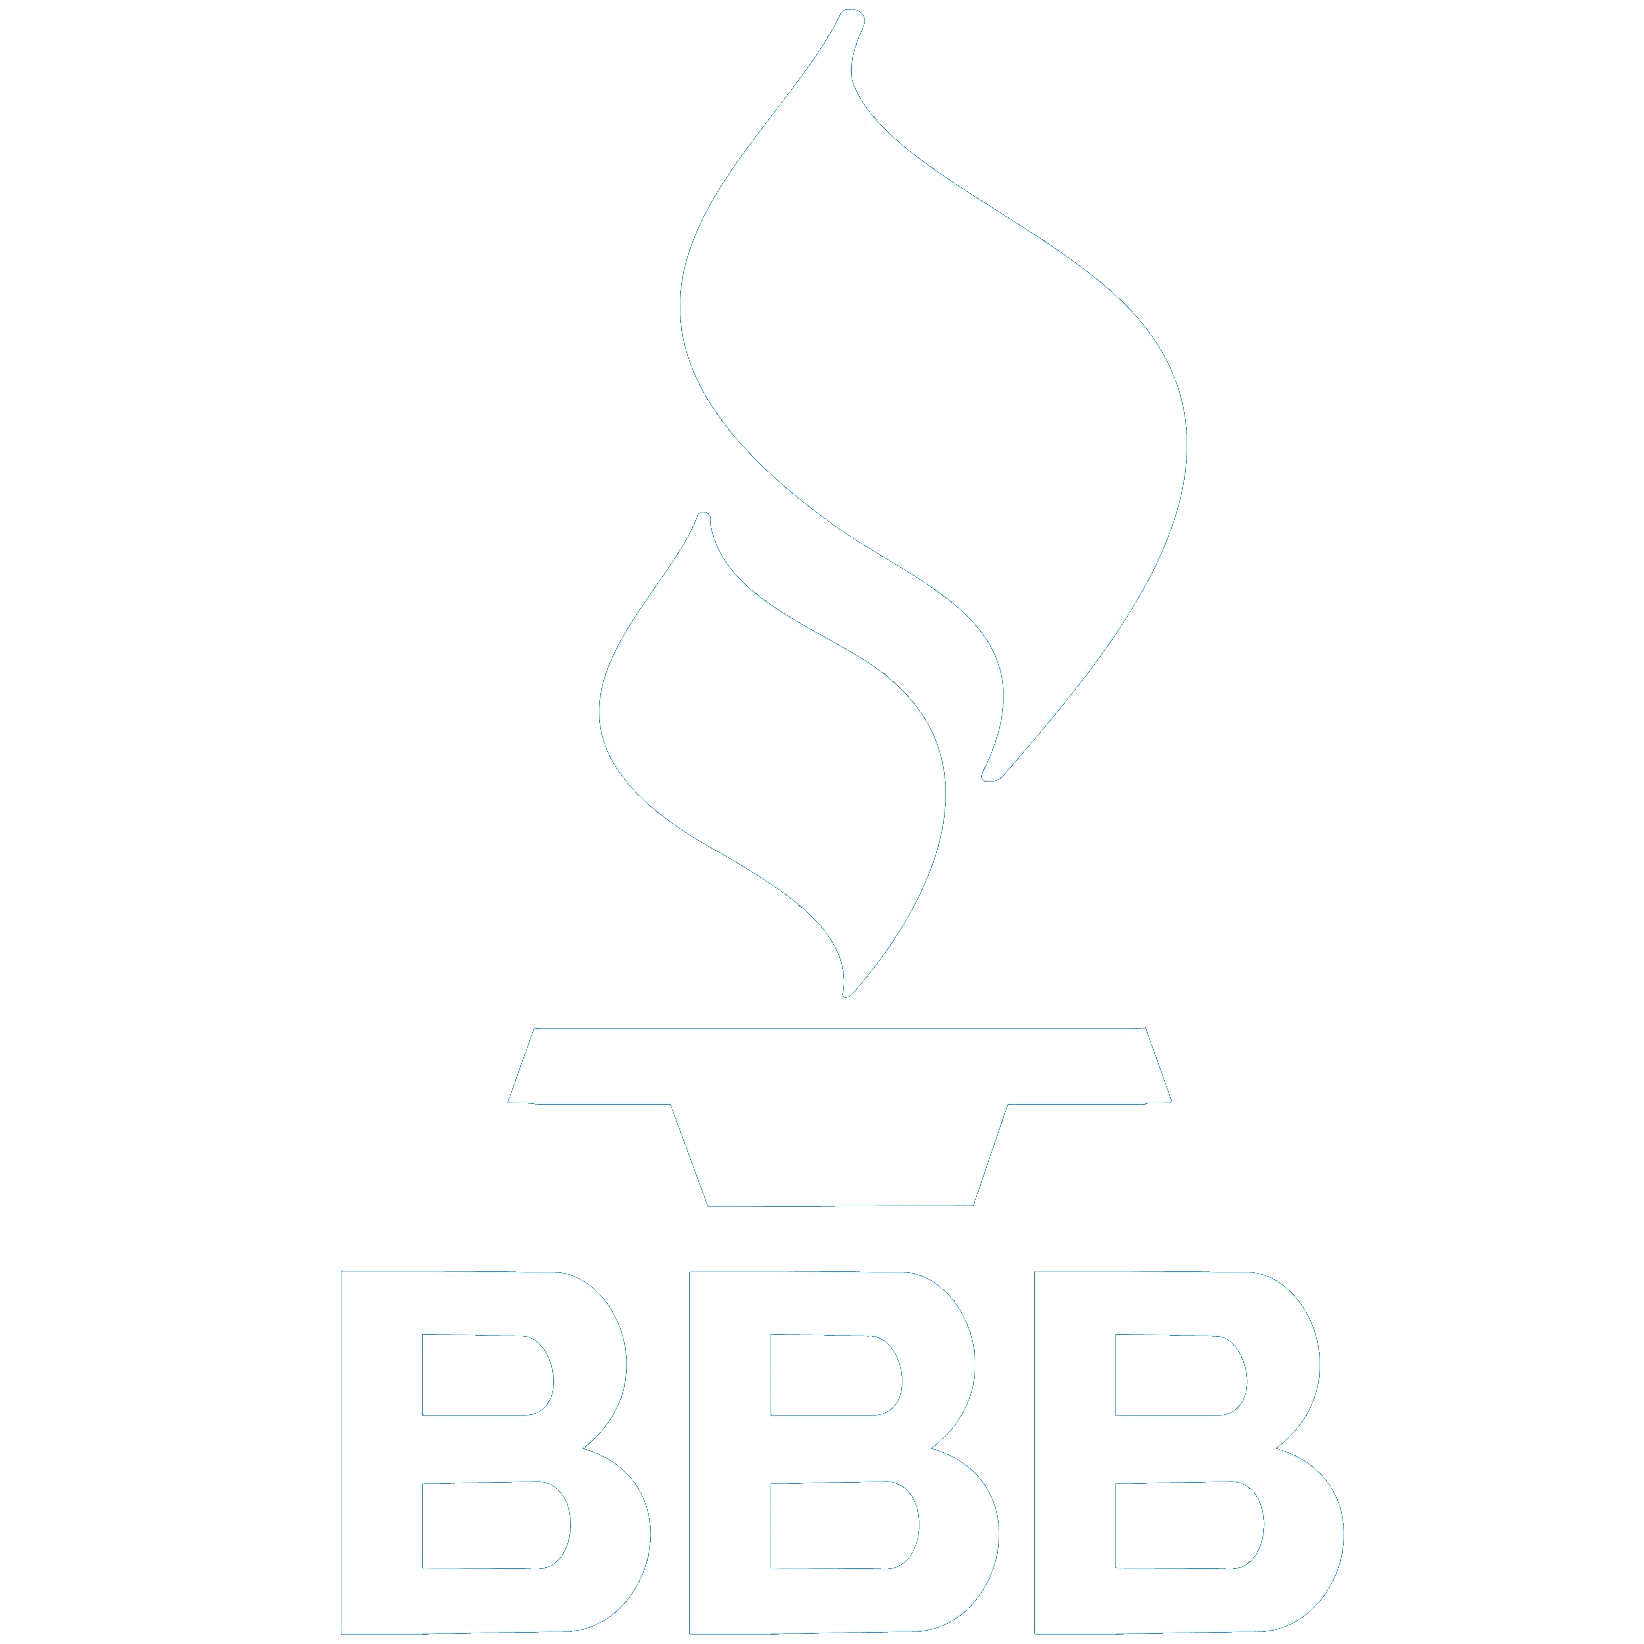 The bbb logo on a tansparent background.